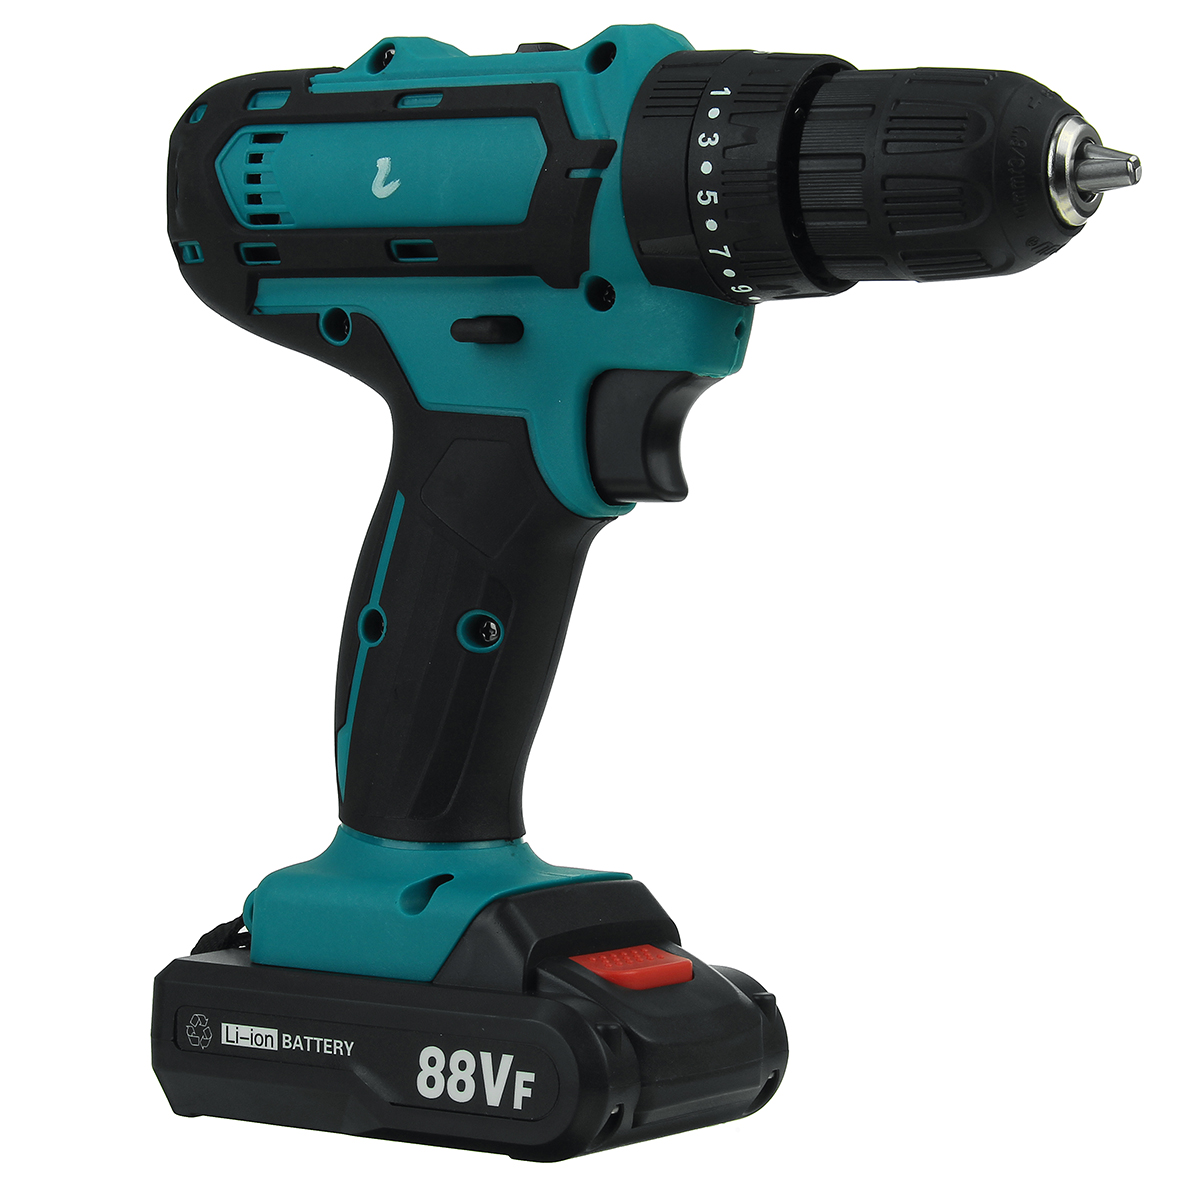 88VF-Cordless-Drill-3-IN-1-Electric-Screwdriver-Hammer-Impact-Drill-7500mAh-2-Speed-1787578-8